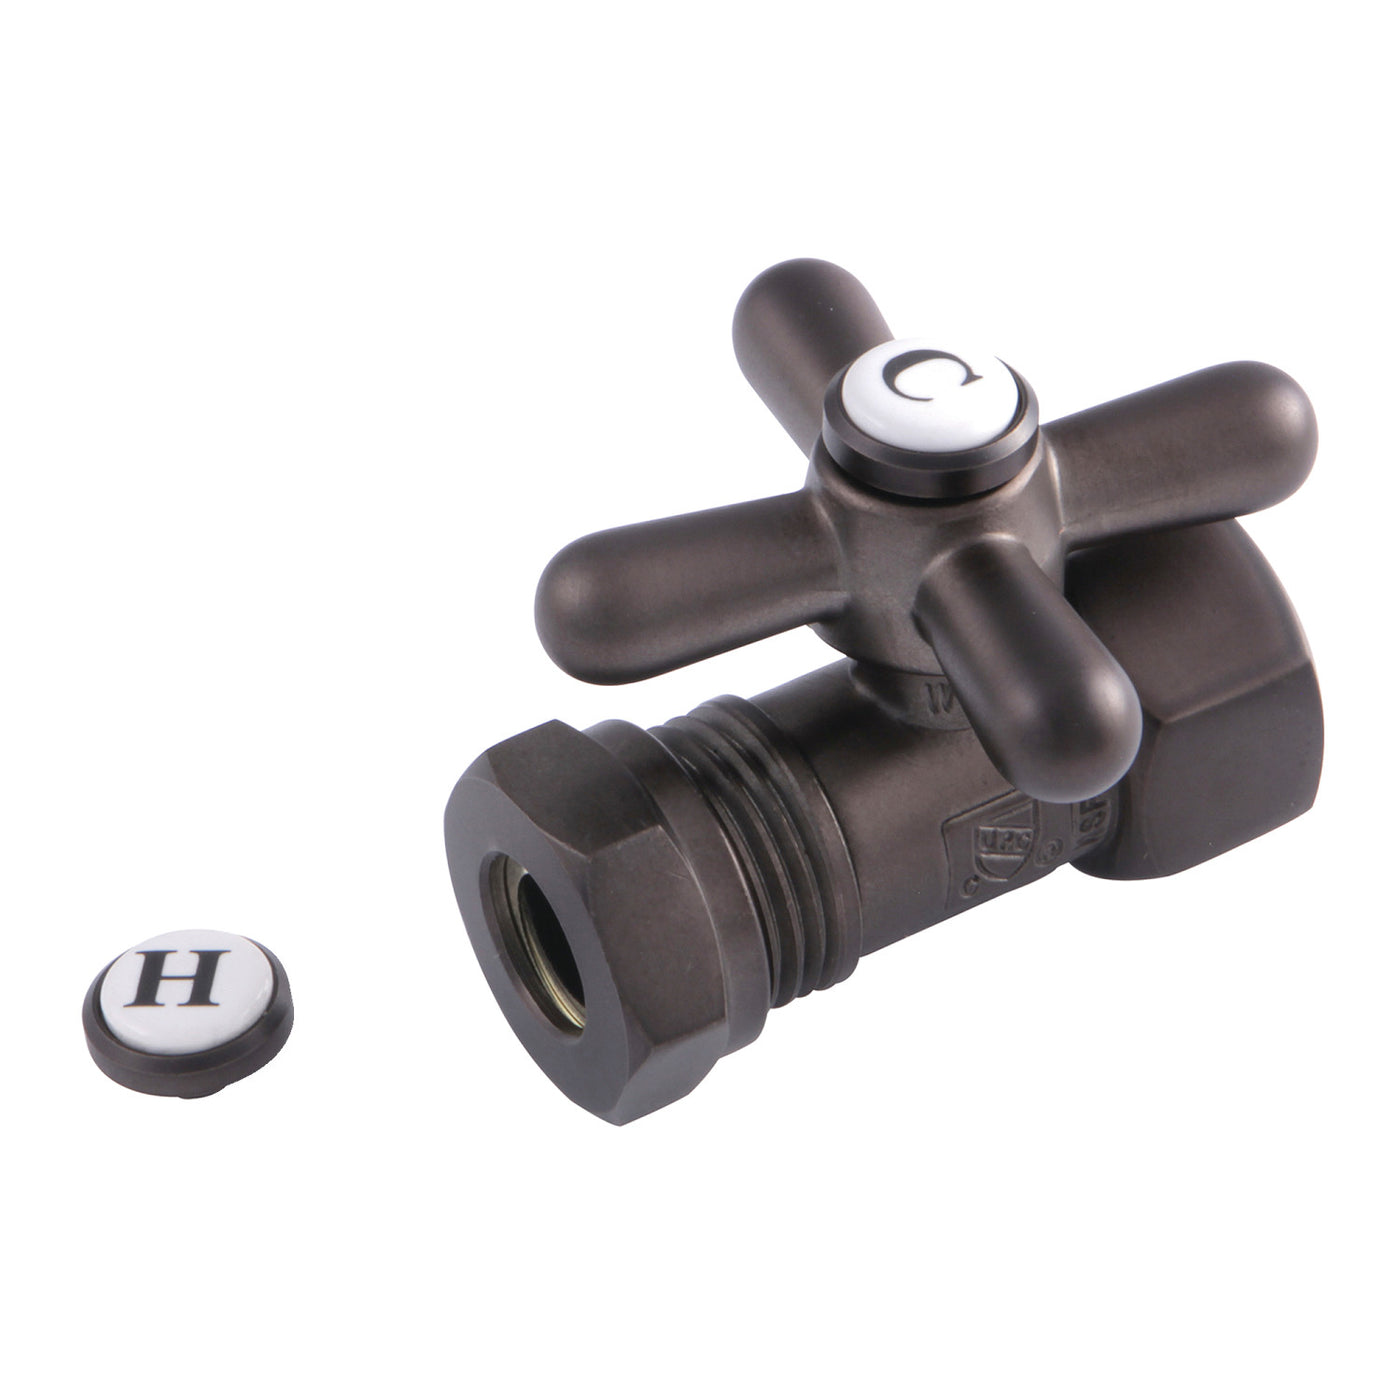 Elements of Design ECC44155X 1/2-Inch FIP x 1/2-Inch or 7/16-Inch Slip Joint Quarter-Turn Straight Stop Valve, Oil Rubbed Bronze